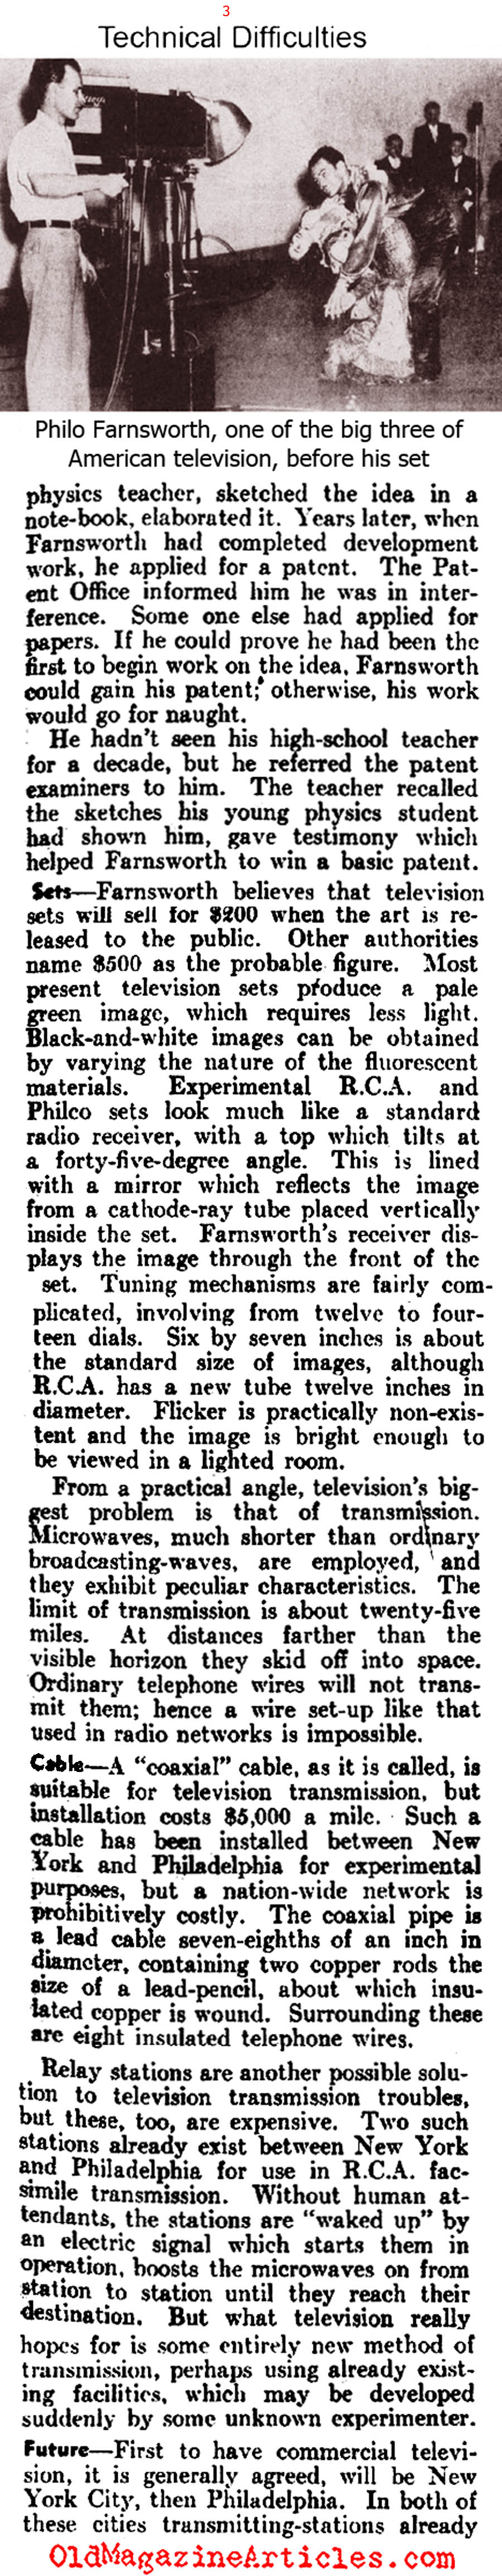 Waiting for Television (Literary Digest, 1937)